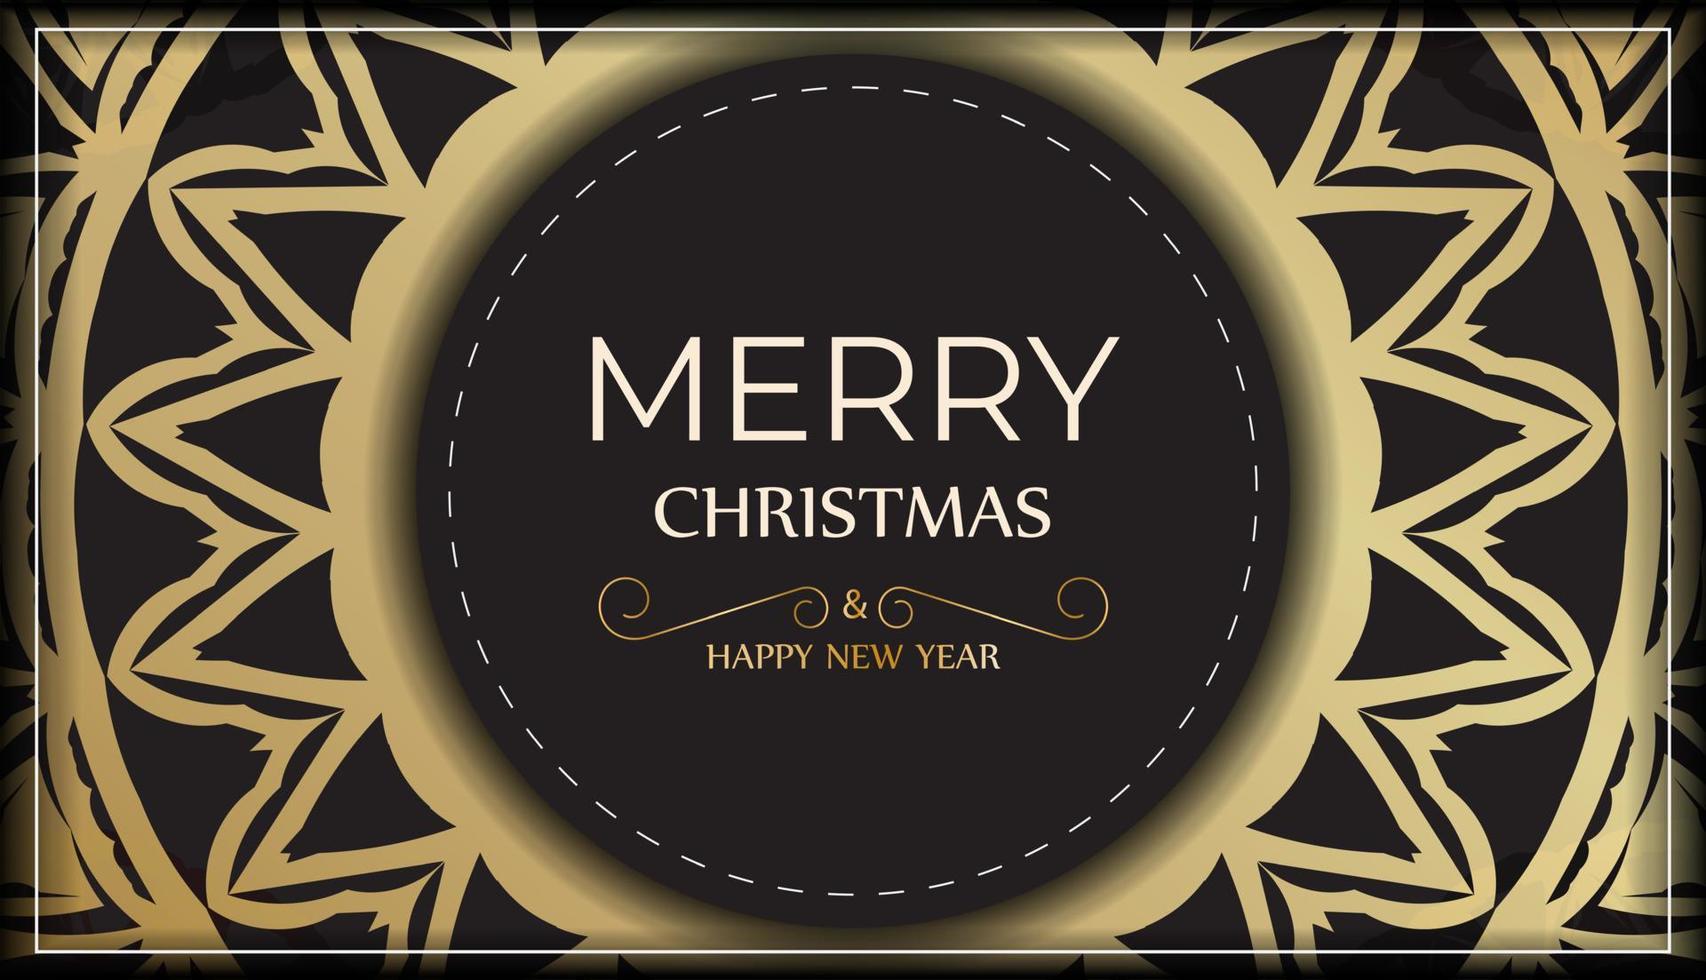 Template Greeting card Happy New Year and Merry Christmas in black color with gold pattern. vector